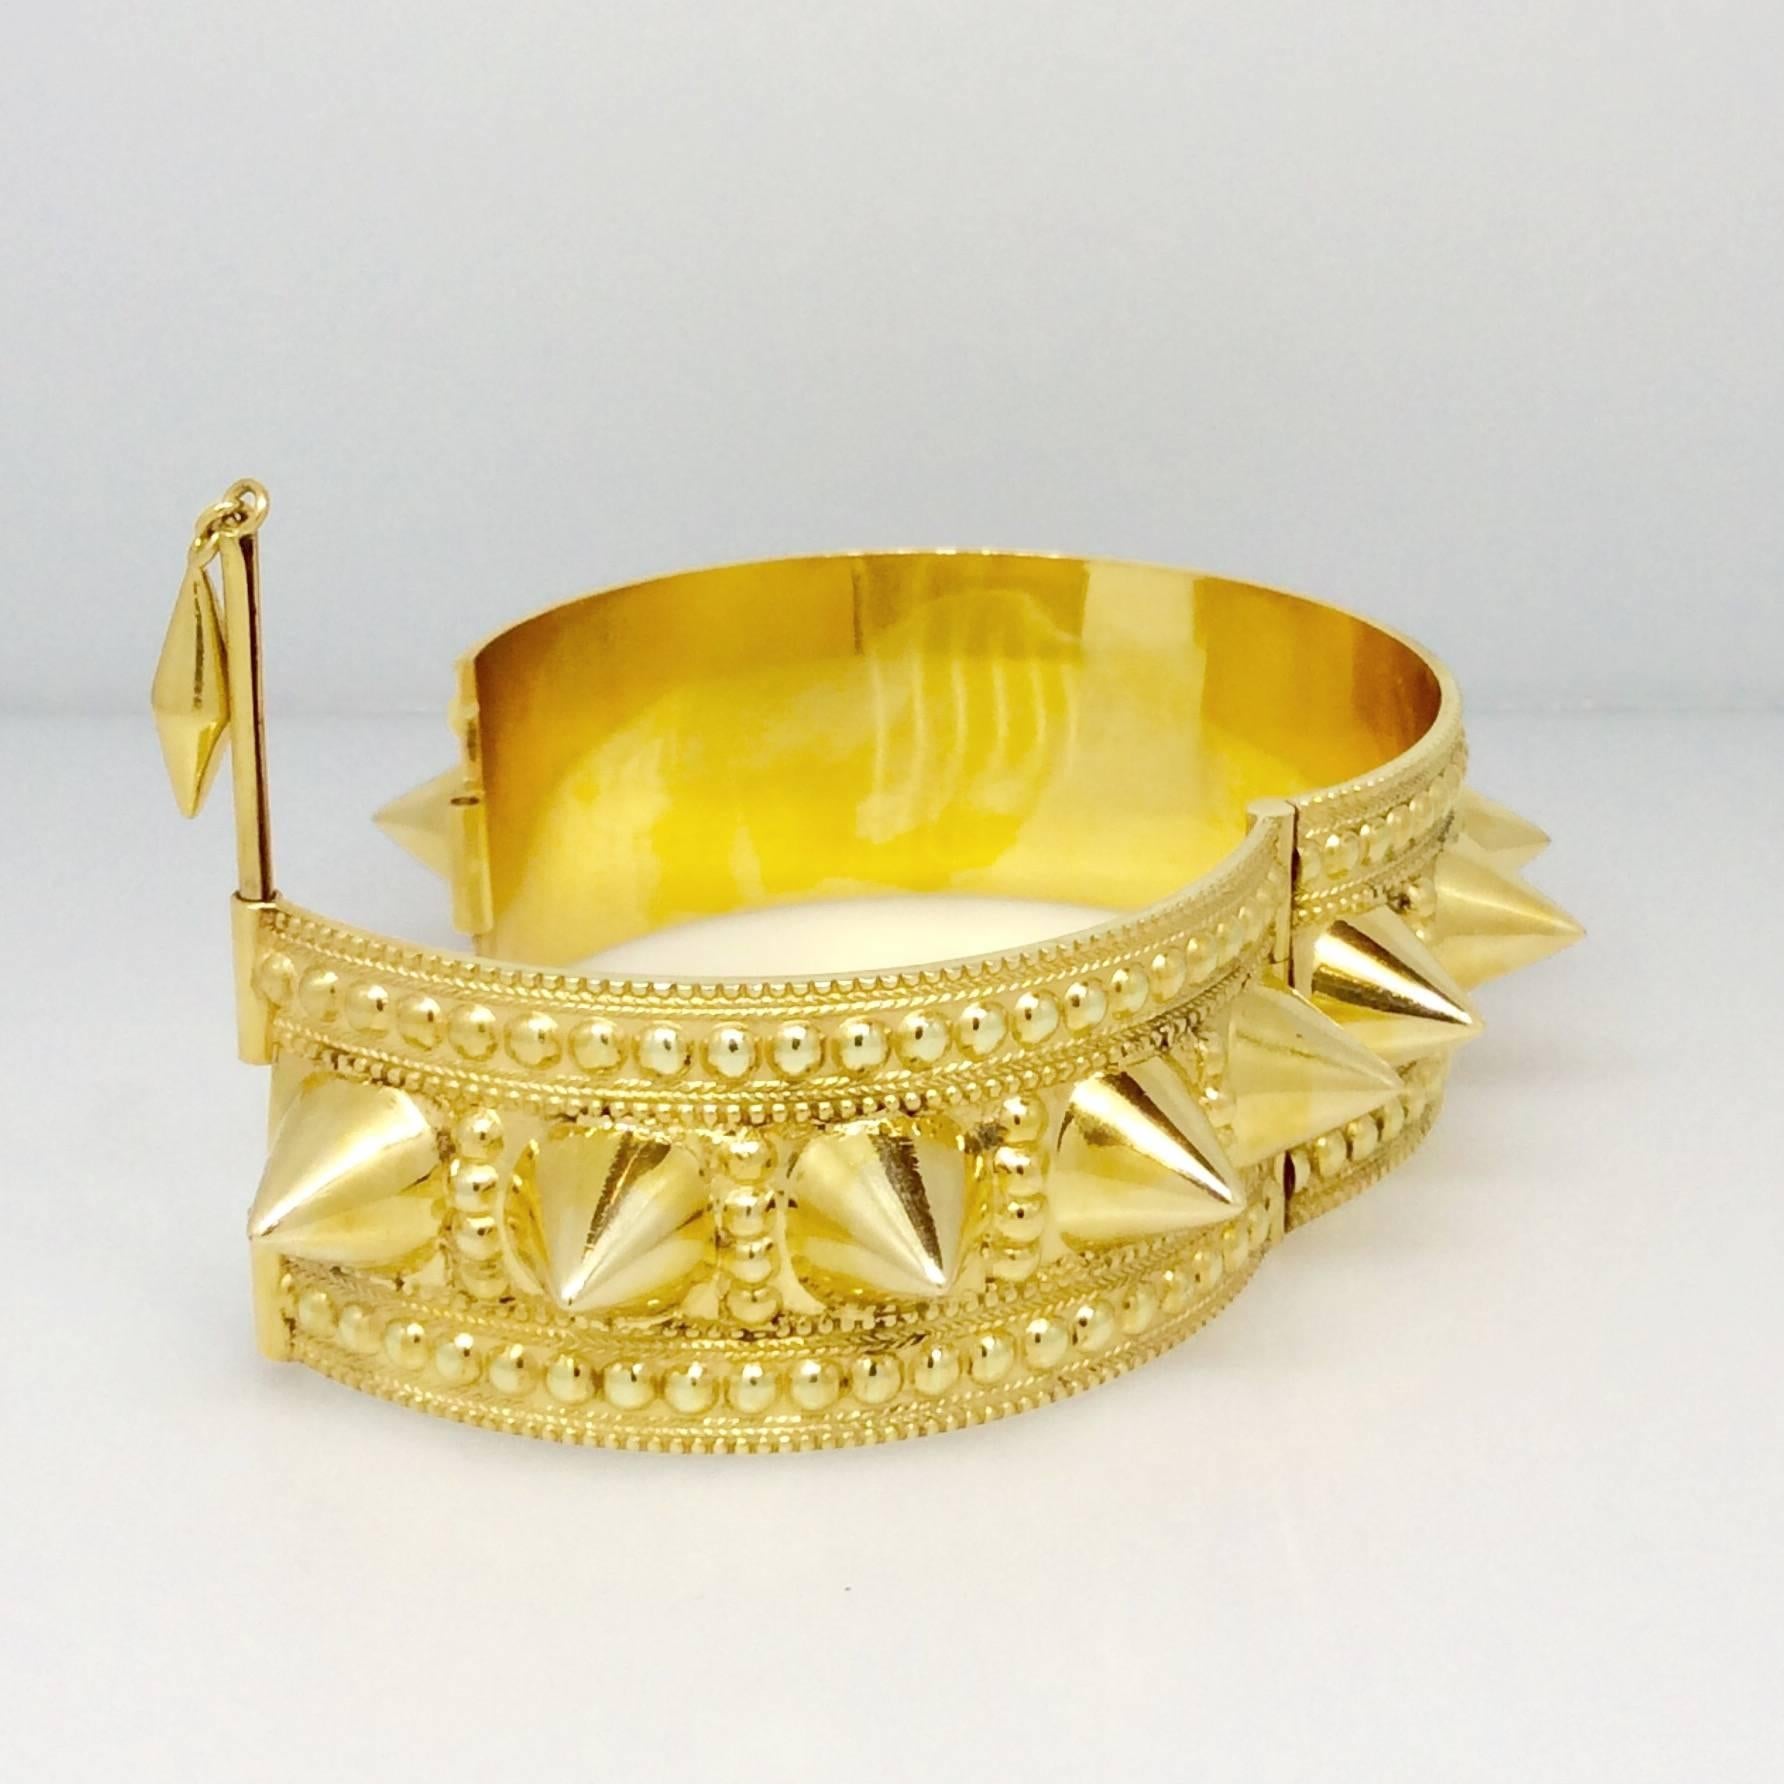 Women's or Men's Wide Spiked Gold Cuff Bangle Bracelet For Sale